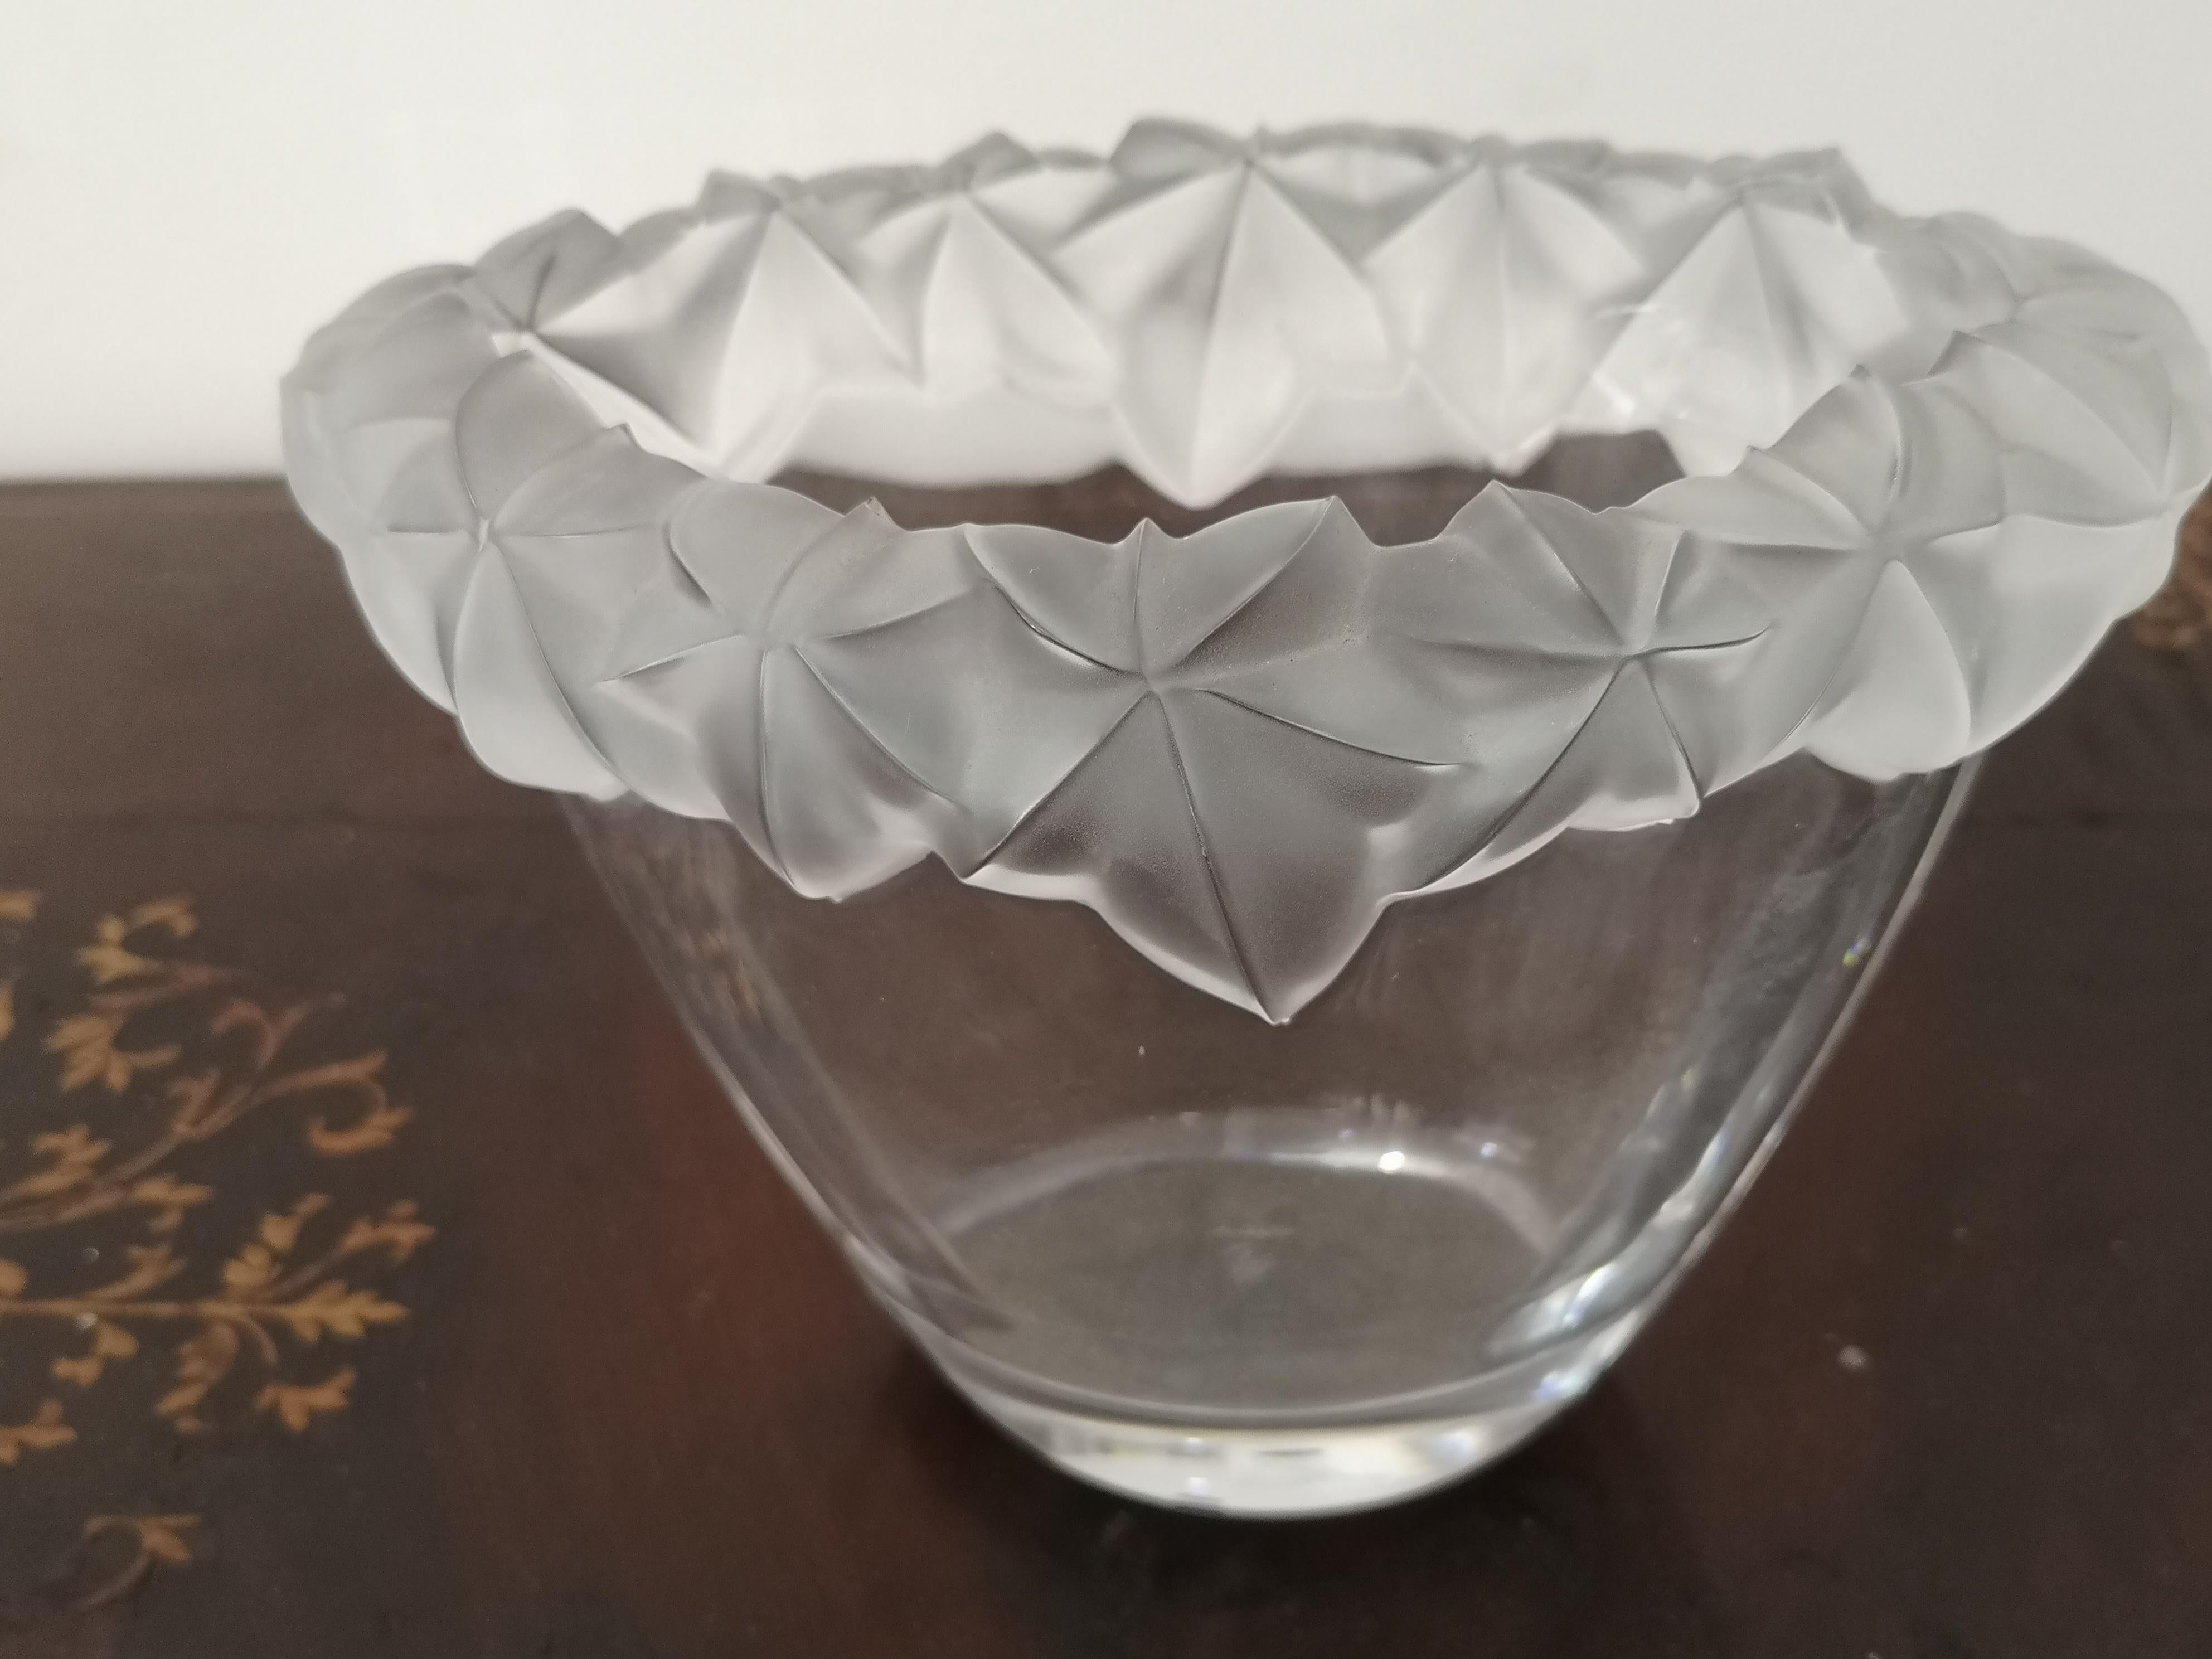 Oval vase made of sevres crystal  anni 80 
frosted glass in the transparent top
in the bottom
The vase measures 15 cm in height
and in width cm 20 x 13
The vase is in excellent condition with no imperfections.

Oval sevres crystal vase from the